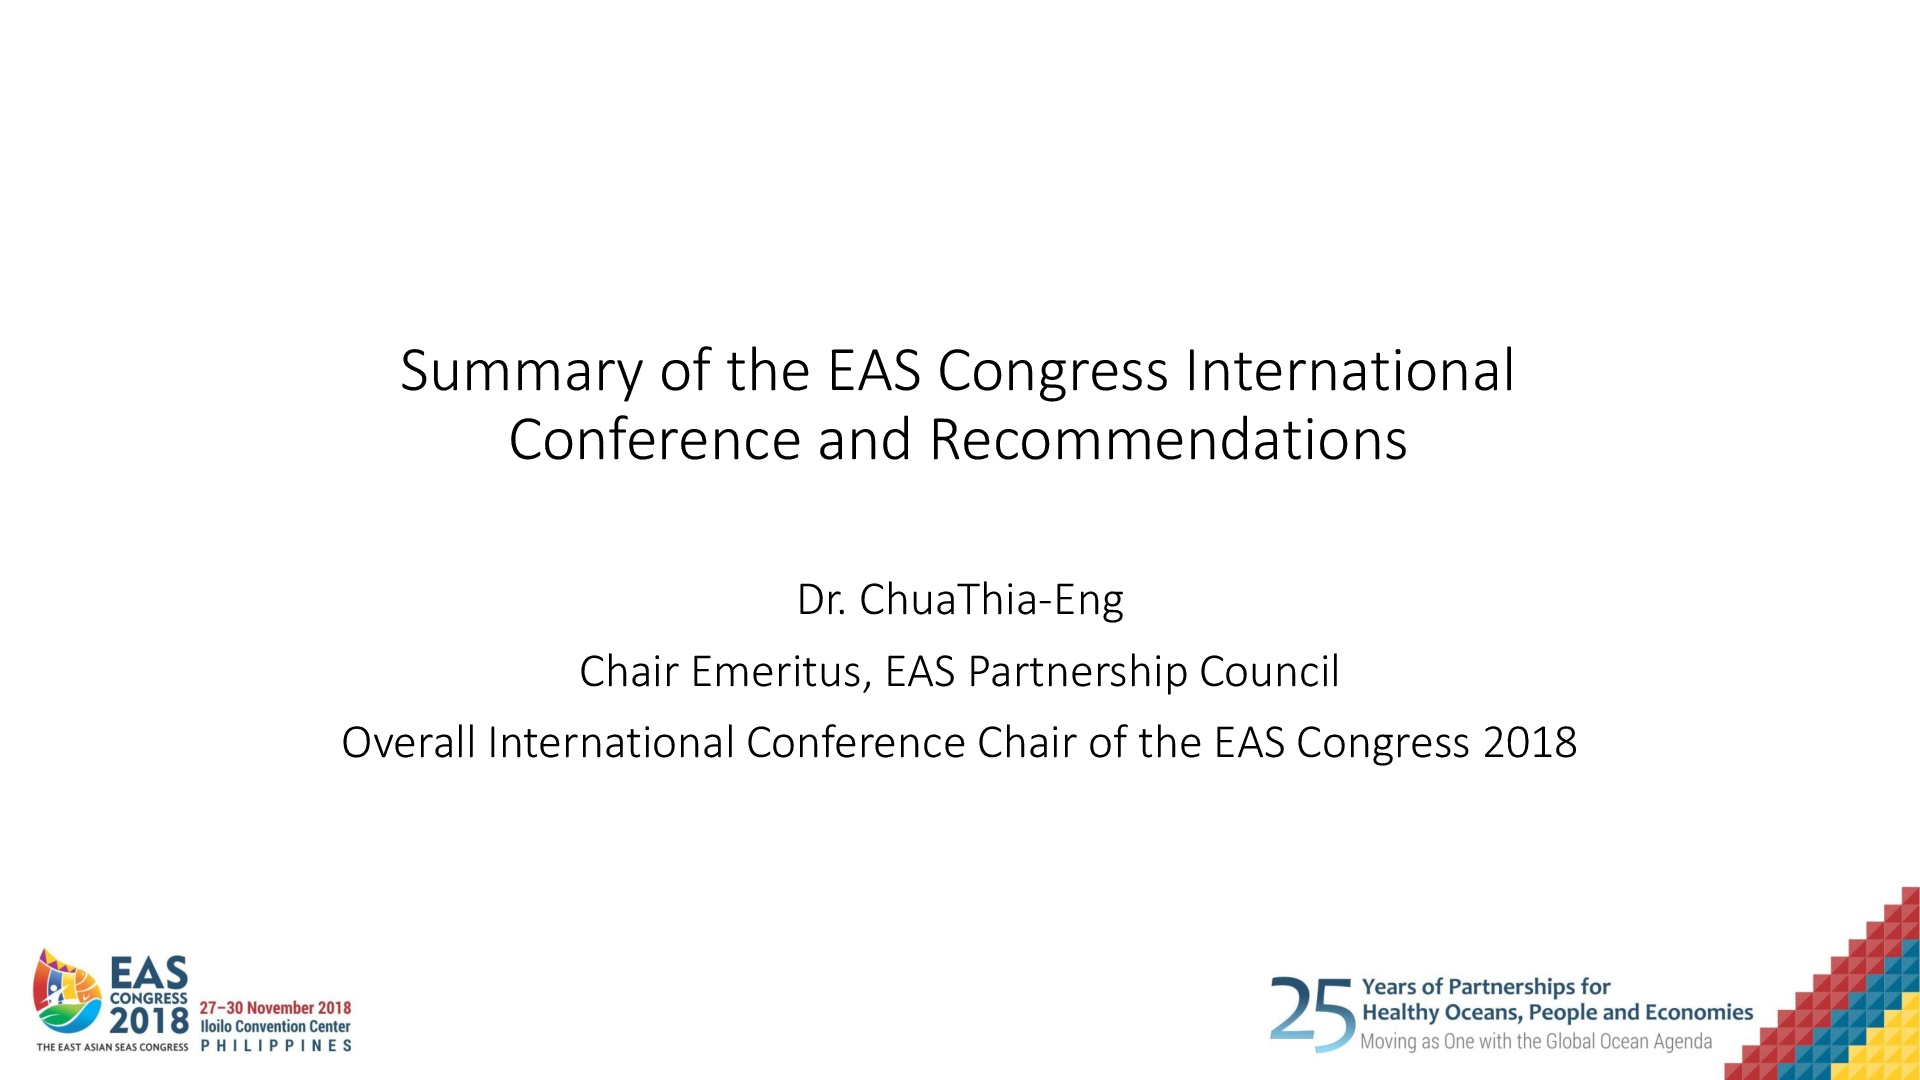 Summary of the EAS Congress International Conference and Recommendations